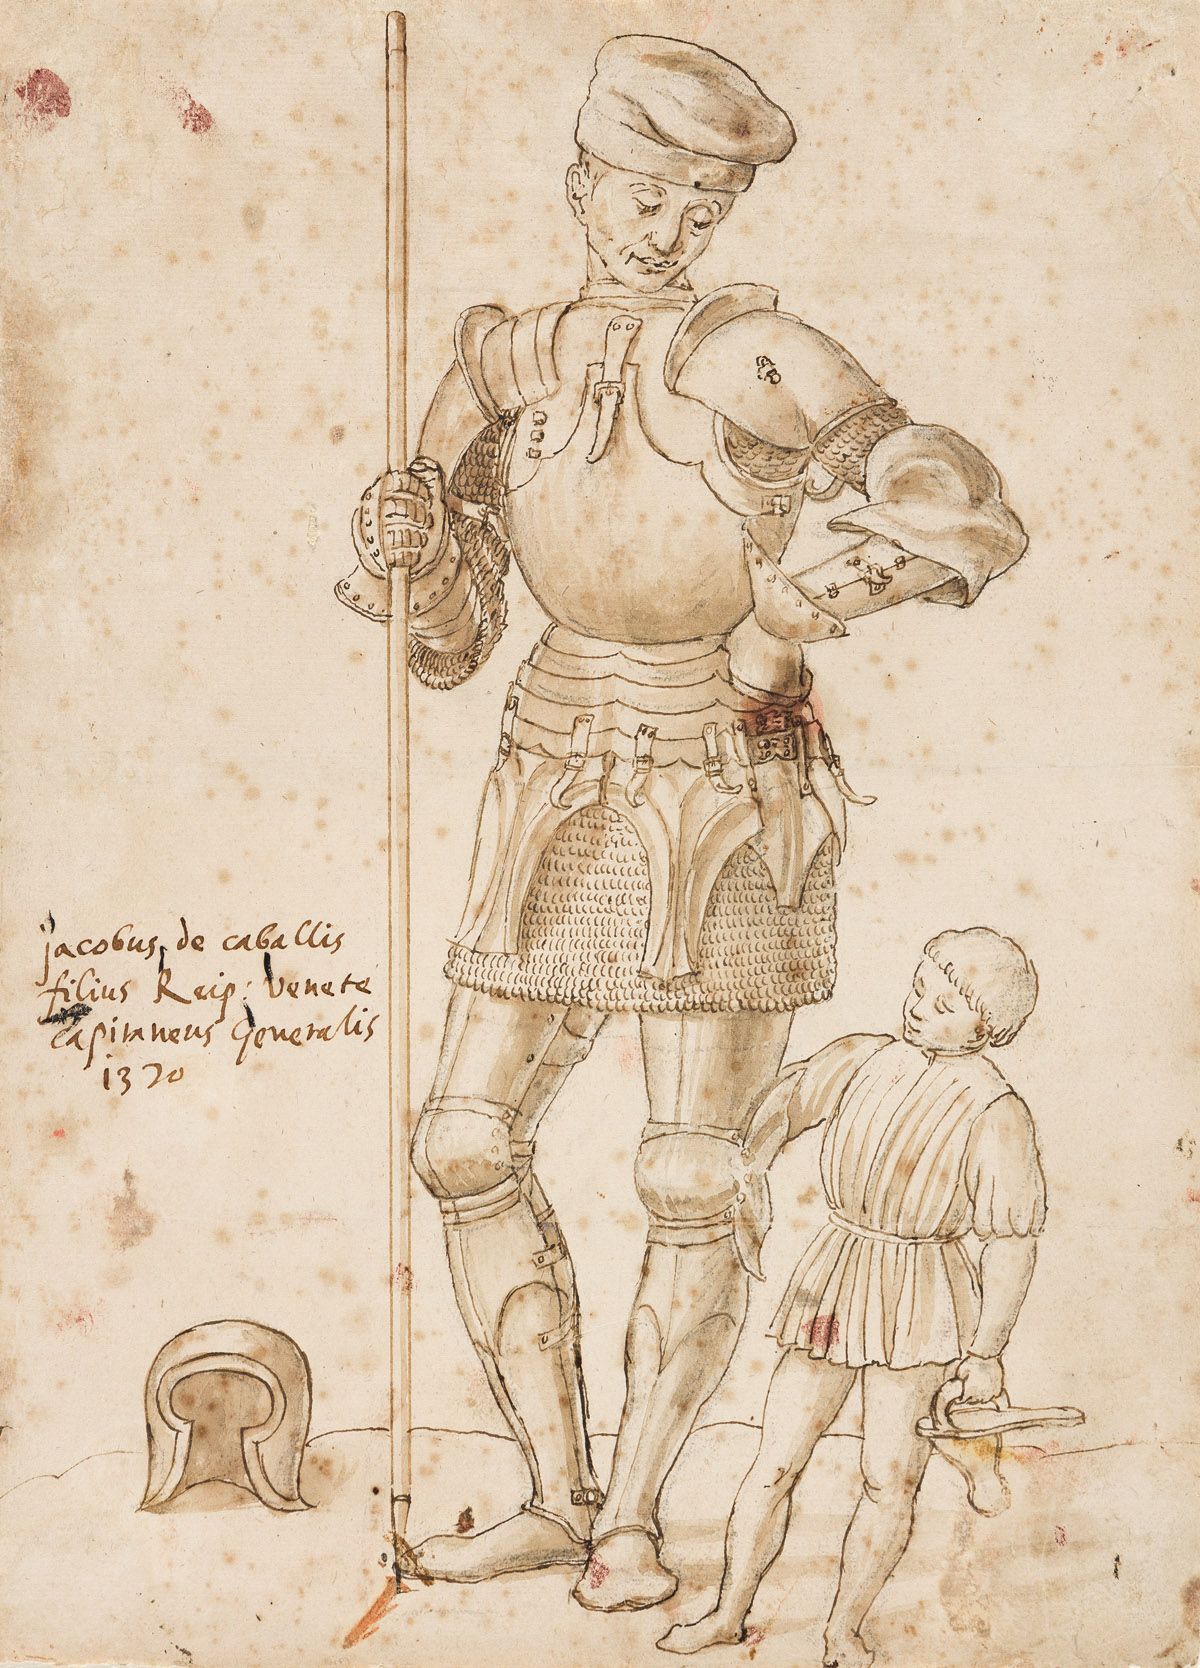 VENETIAN SCHOOL, 16TH CENTURY A Knight in Armor with a Page.